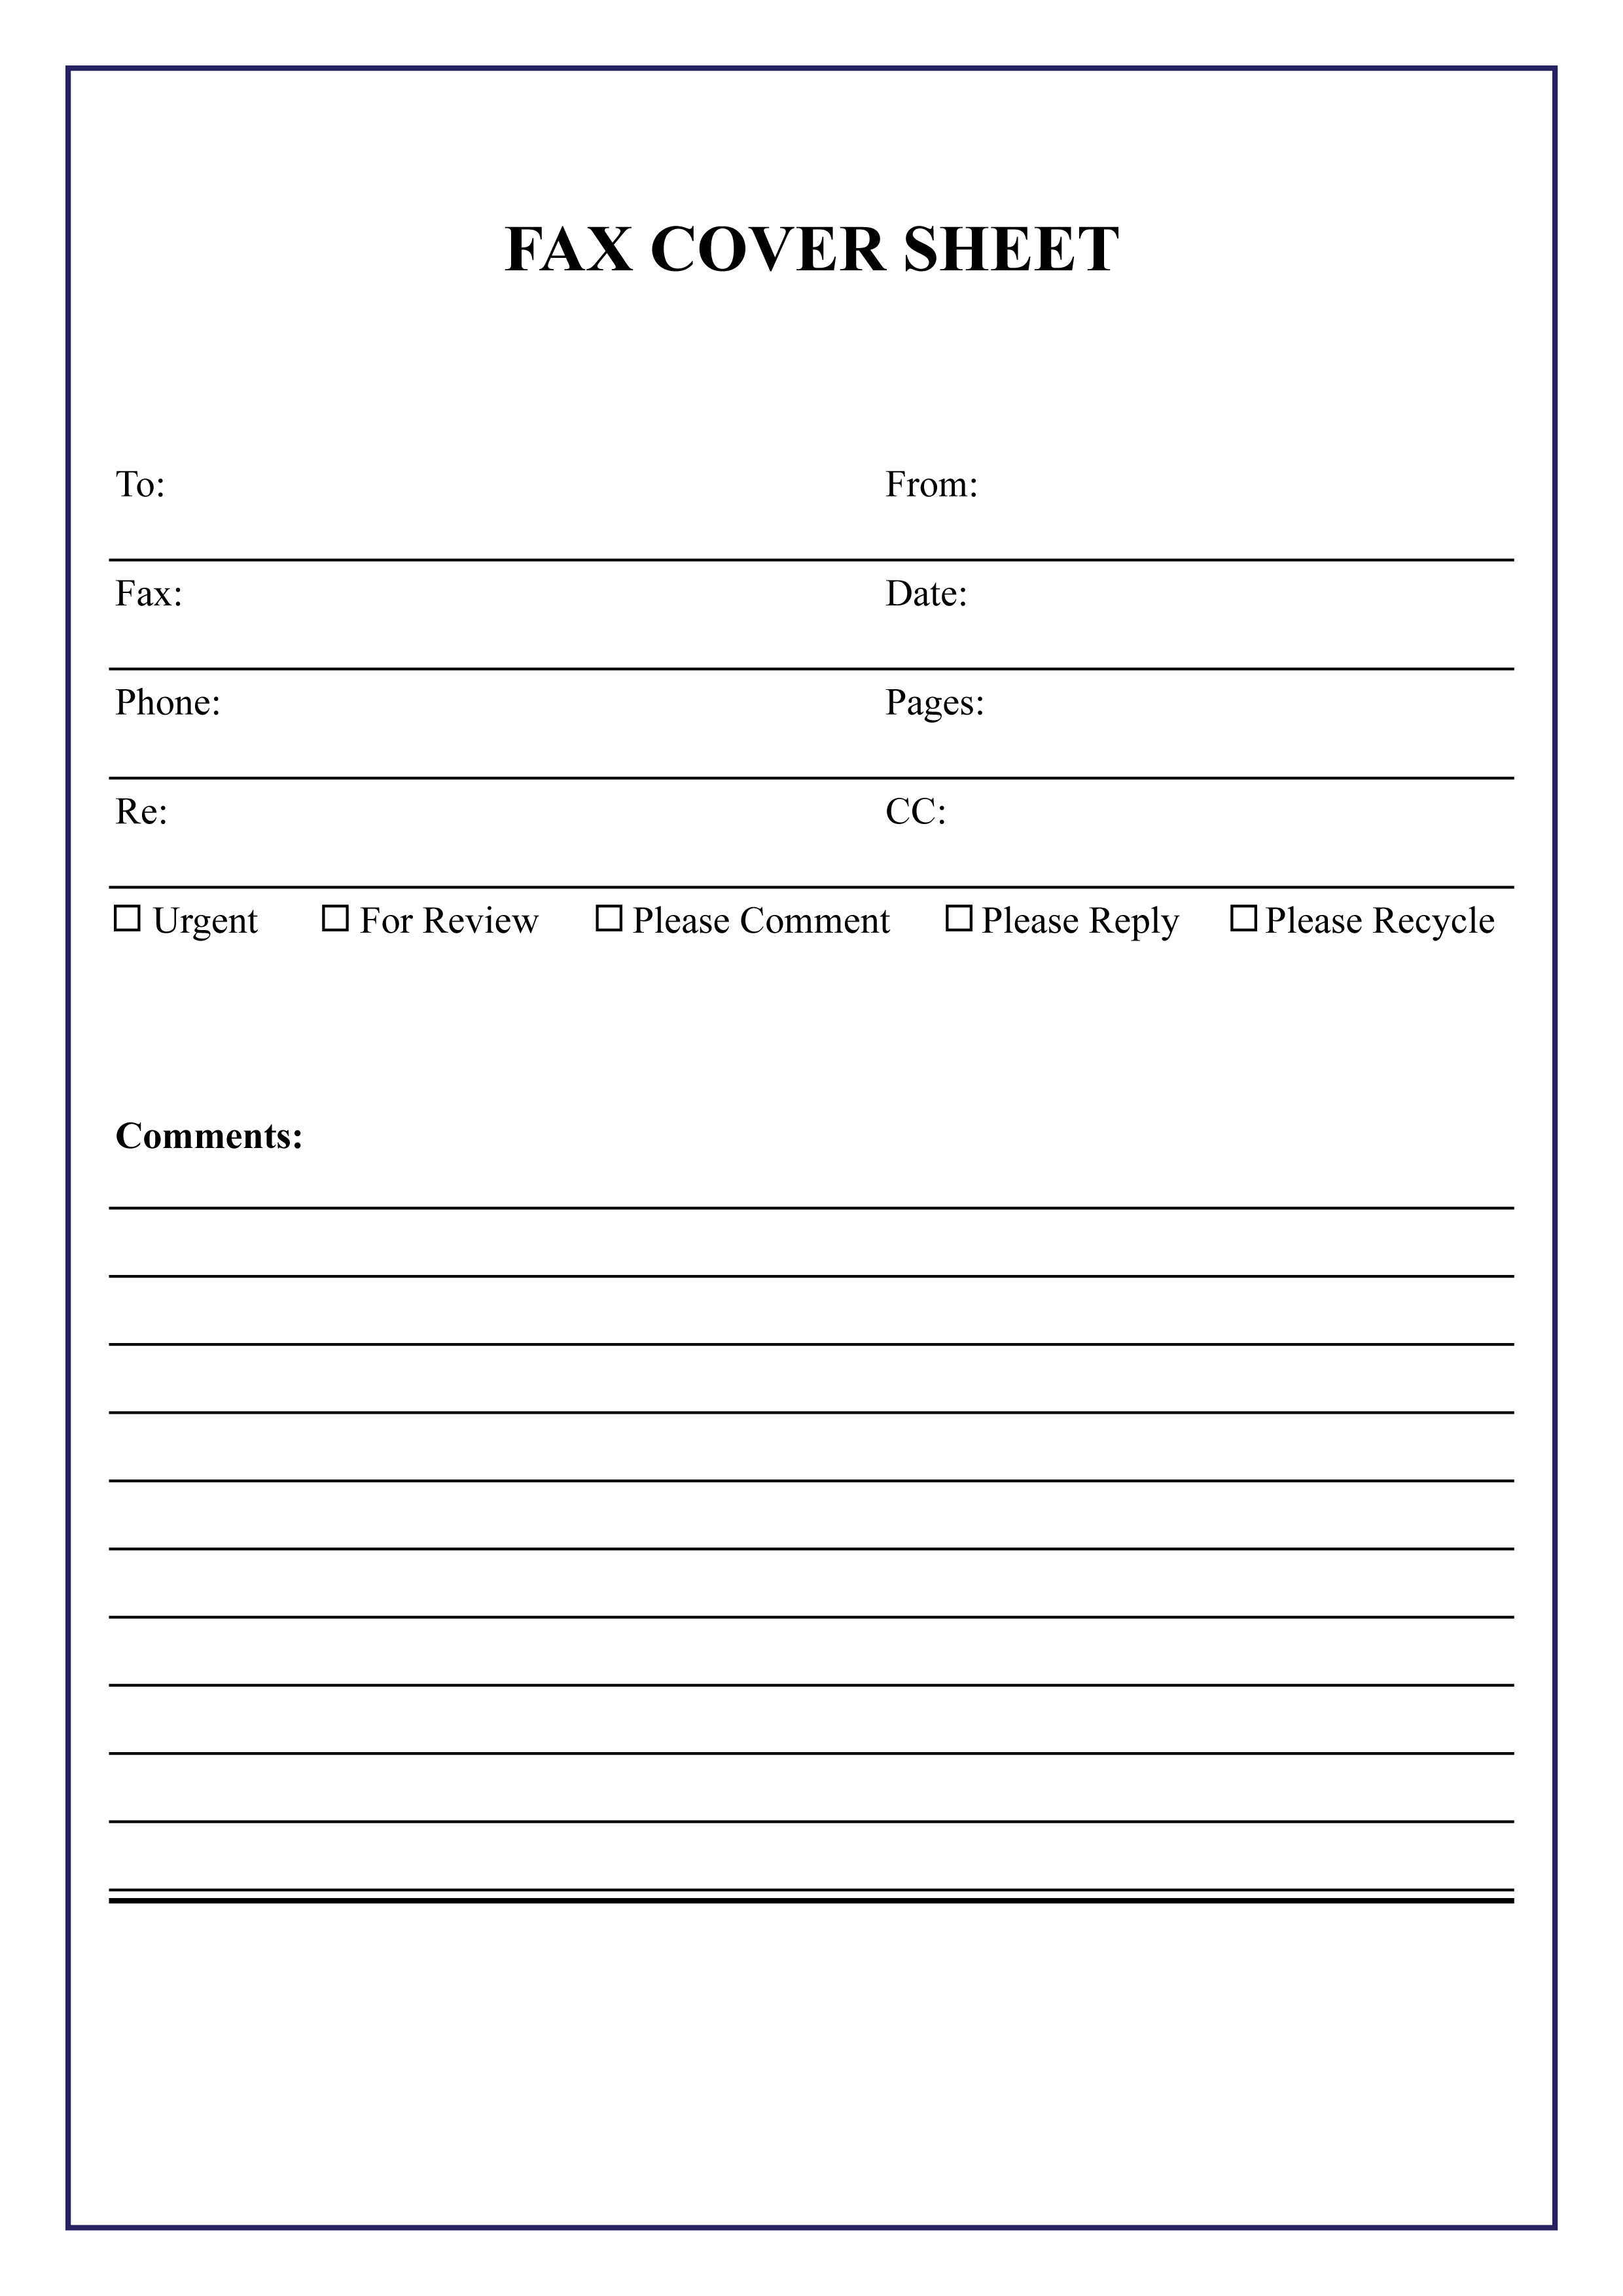 Free Fax Cover Sheet Templates in PDF Excel Word